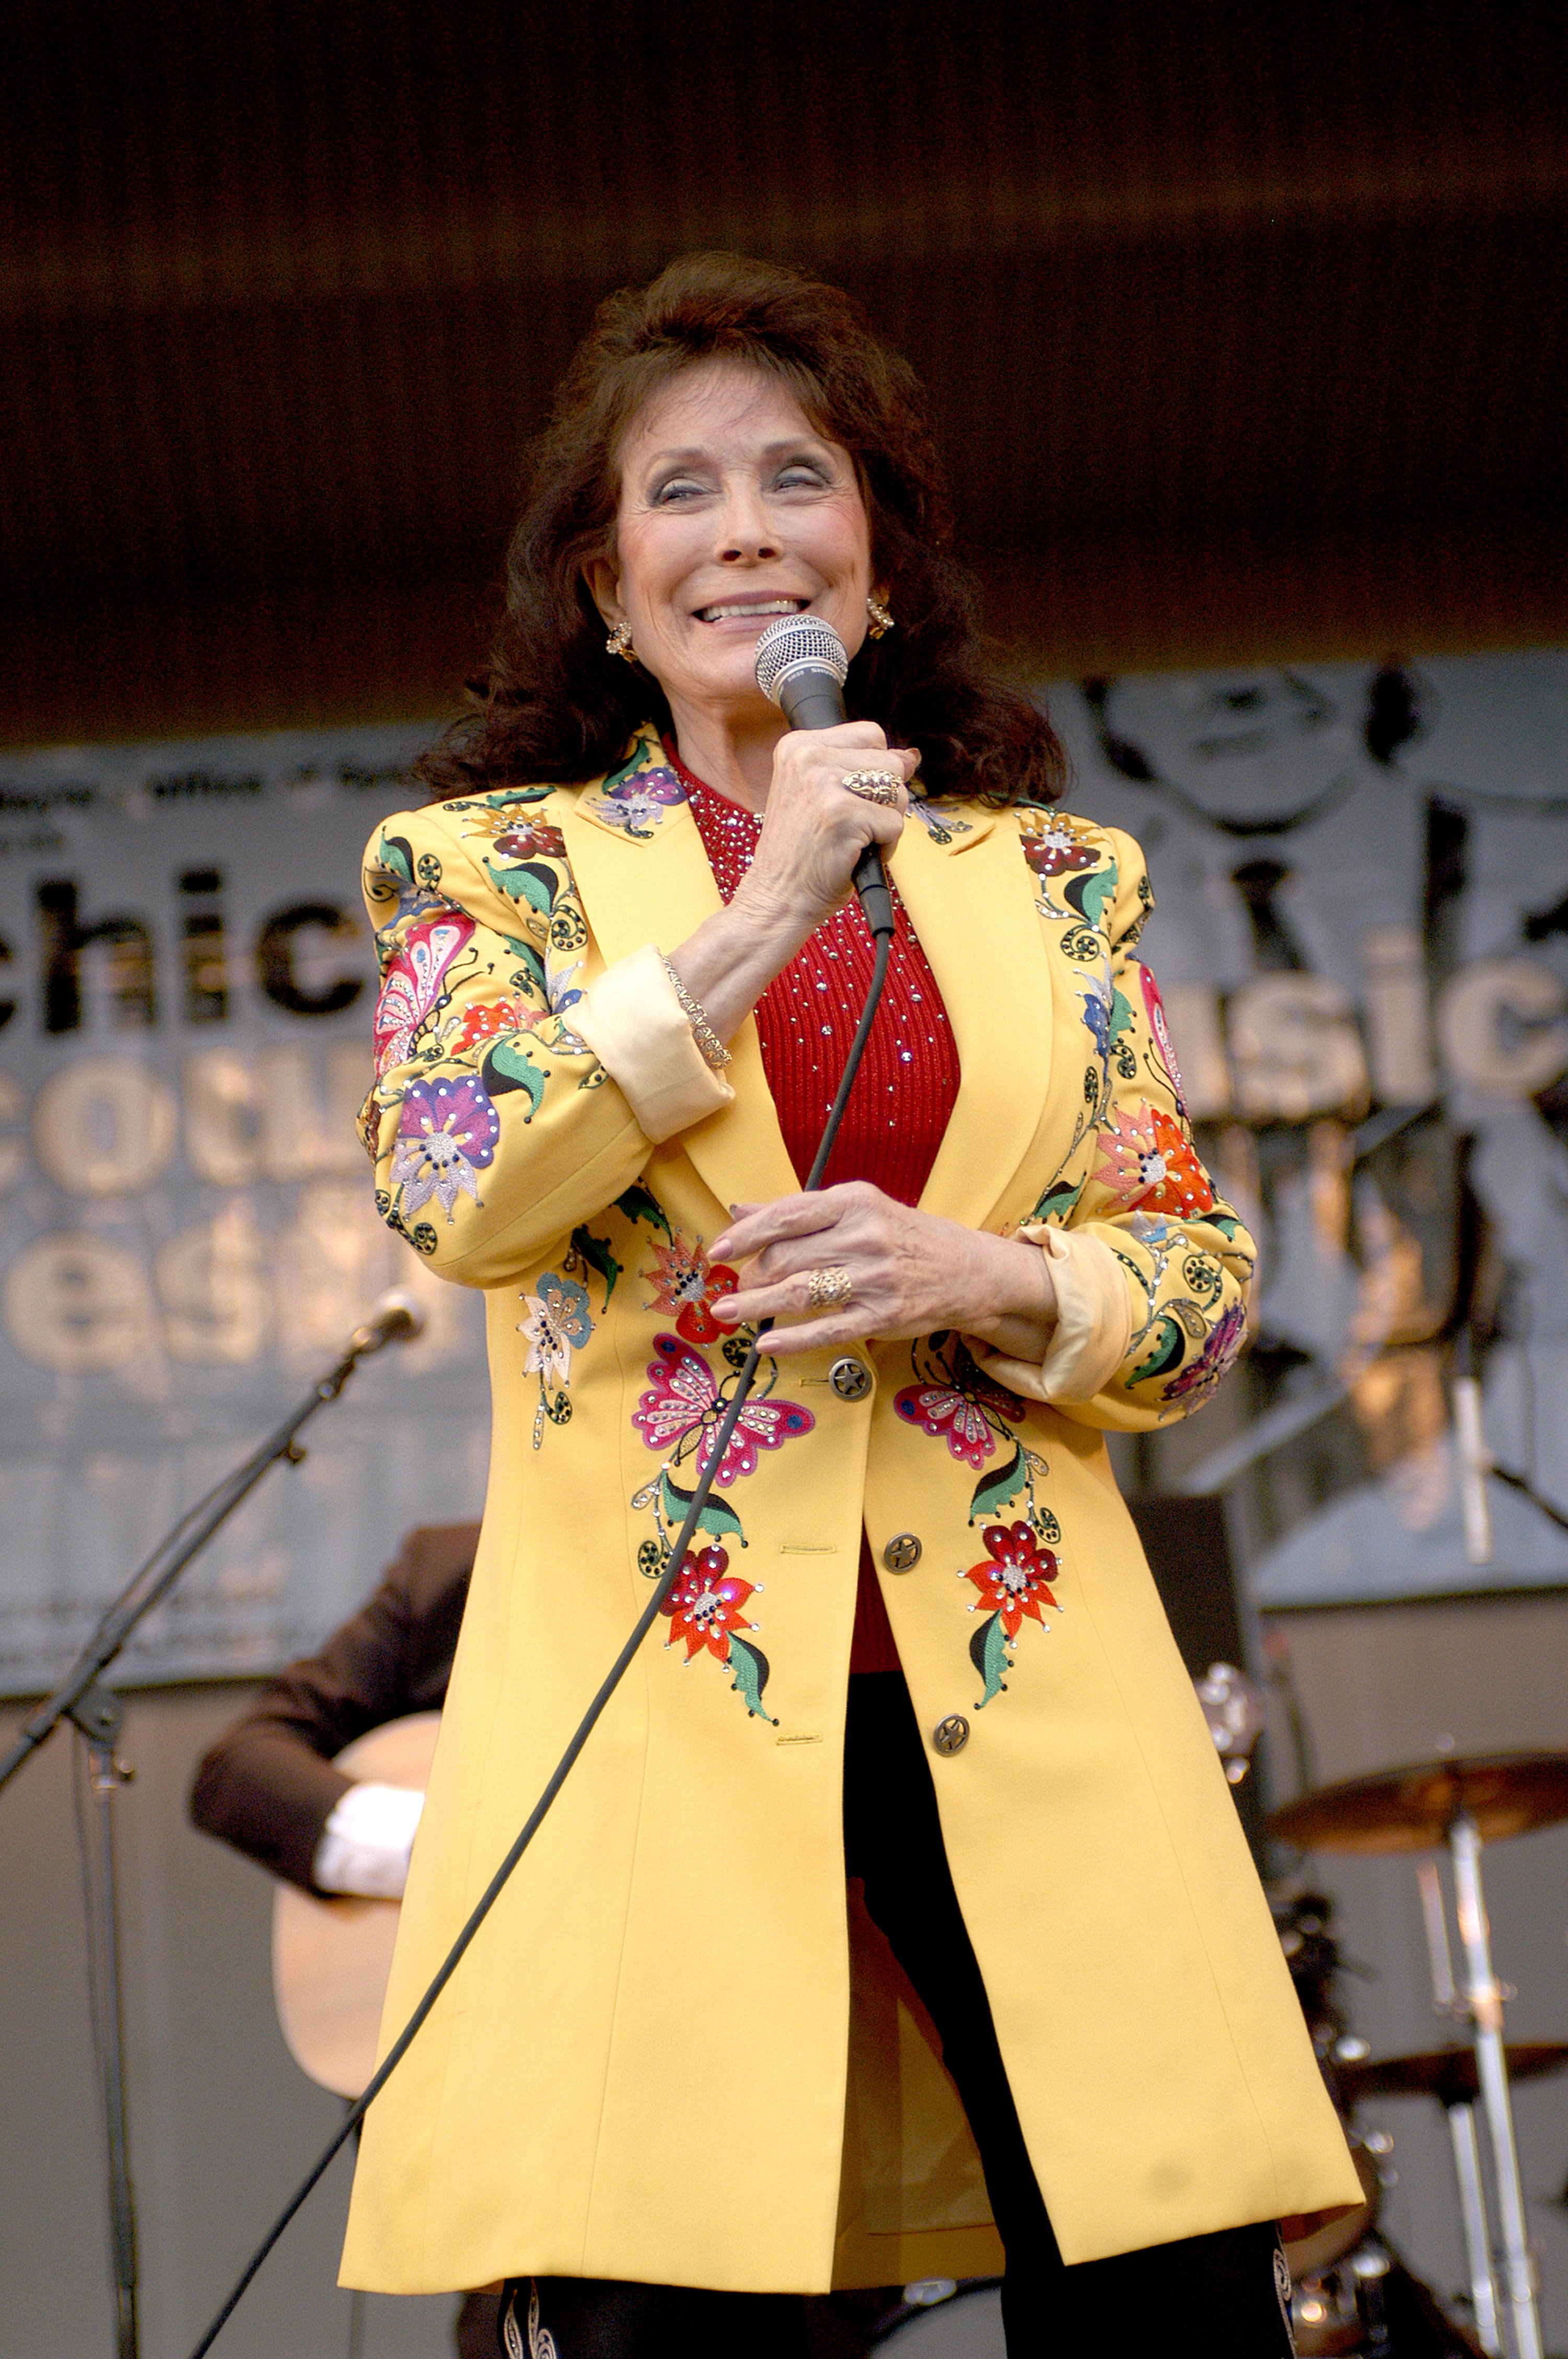 American musician Loretta Lynn performs onstage at Grant Park's Petrillo Music Shell during the Chicago Country Music Festival, Chicago, Illinois, June 28, 2003. | Source: Getty Images